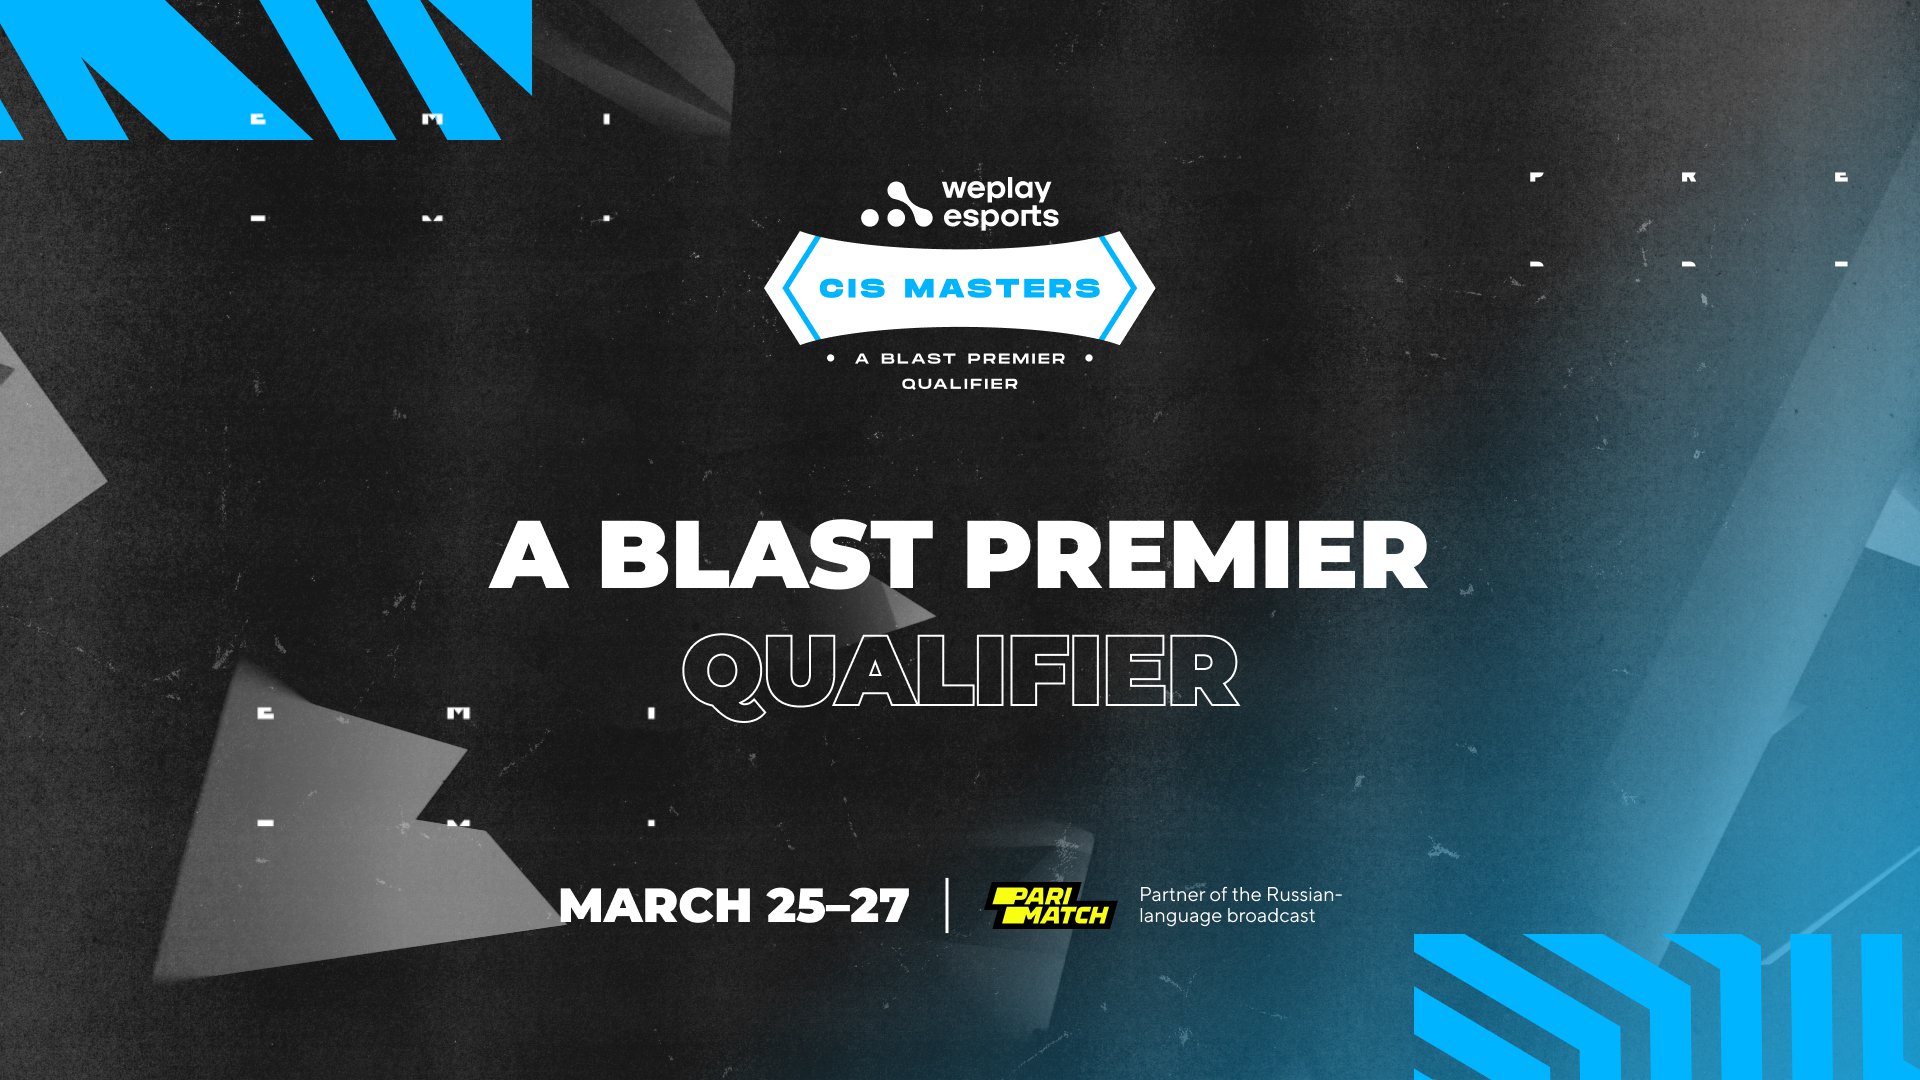 WePlay CIS Masters: BLAST Premier CIS Qualifier by WePlay Esports. Visual: WePlay Holding